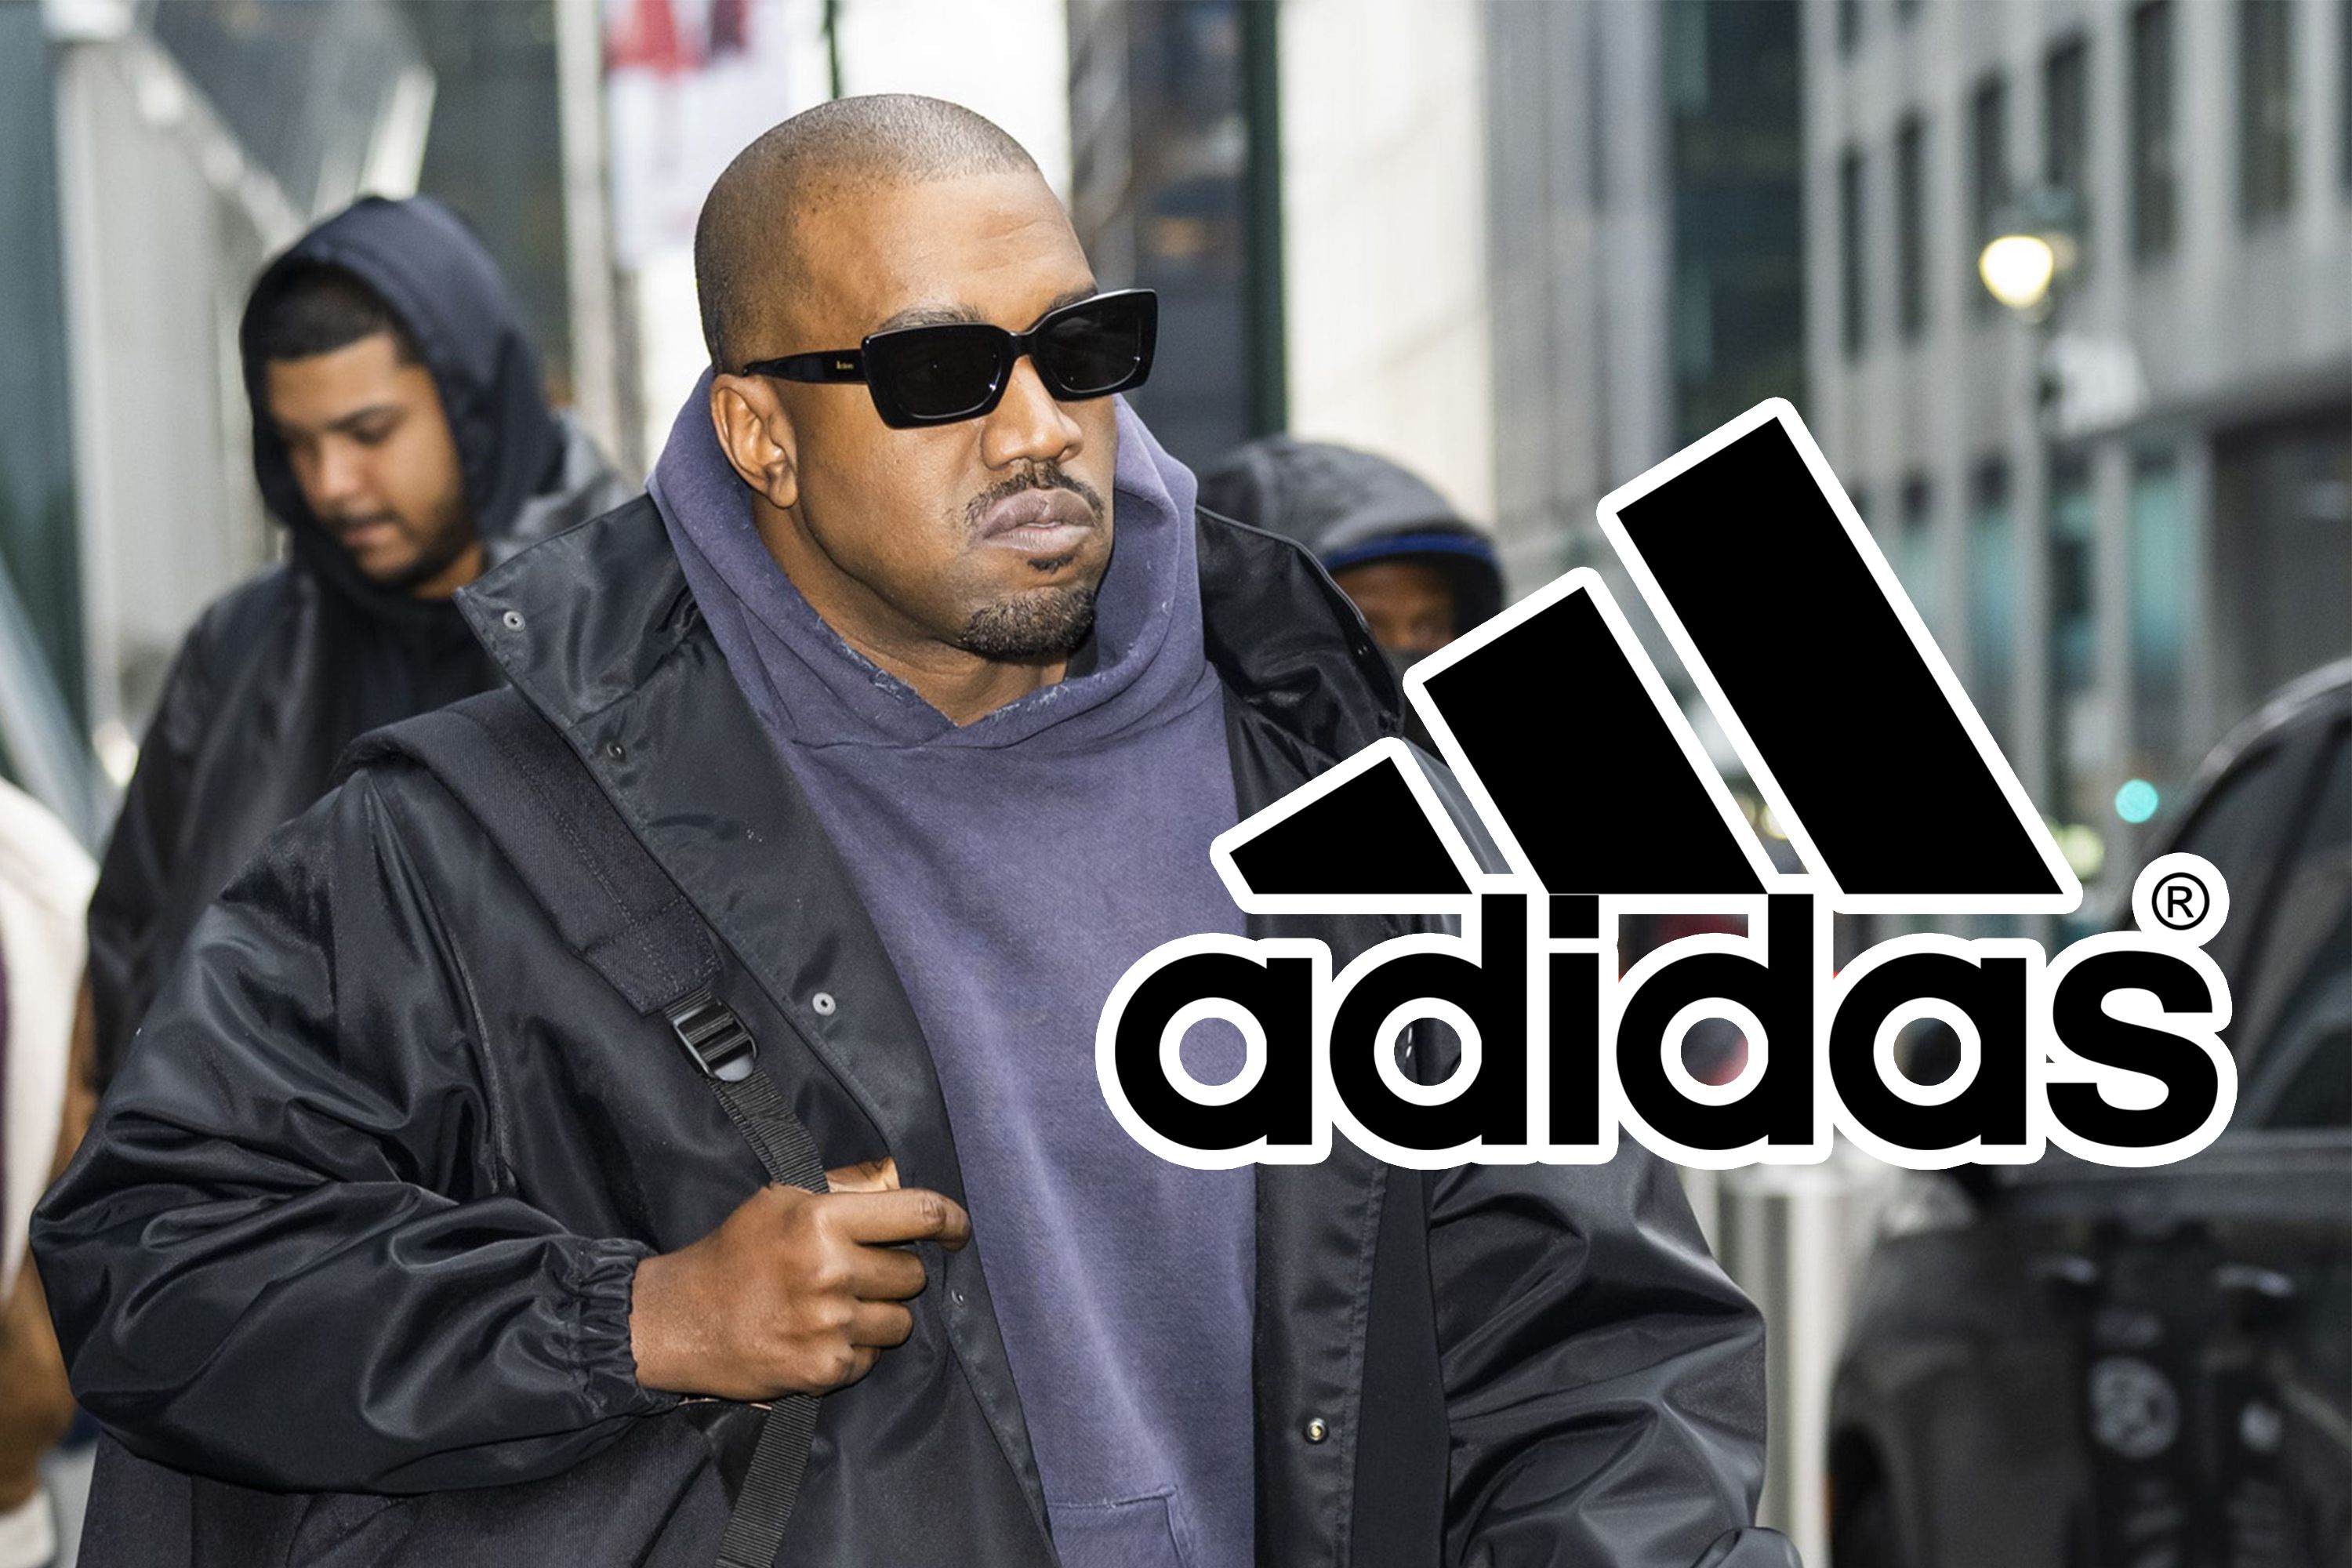 Get the Hottest Look with Kanye West's Adidas Collection